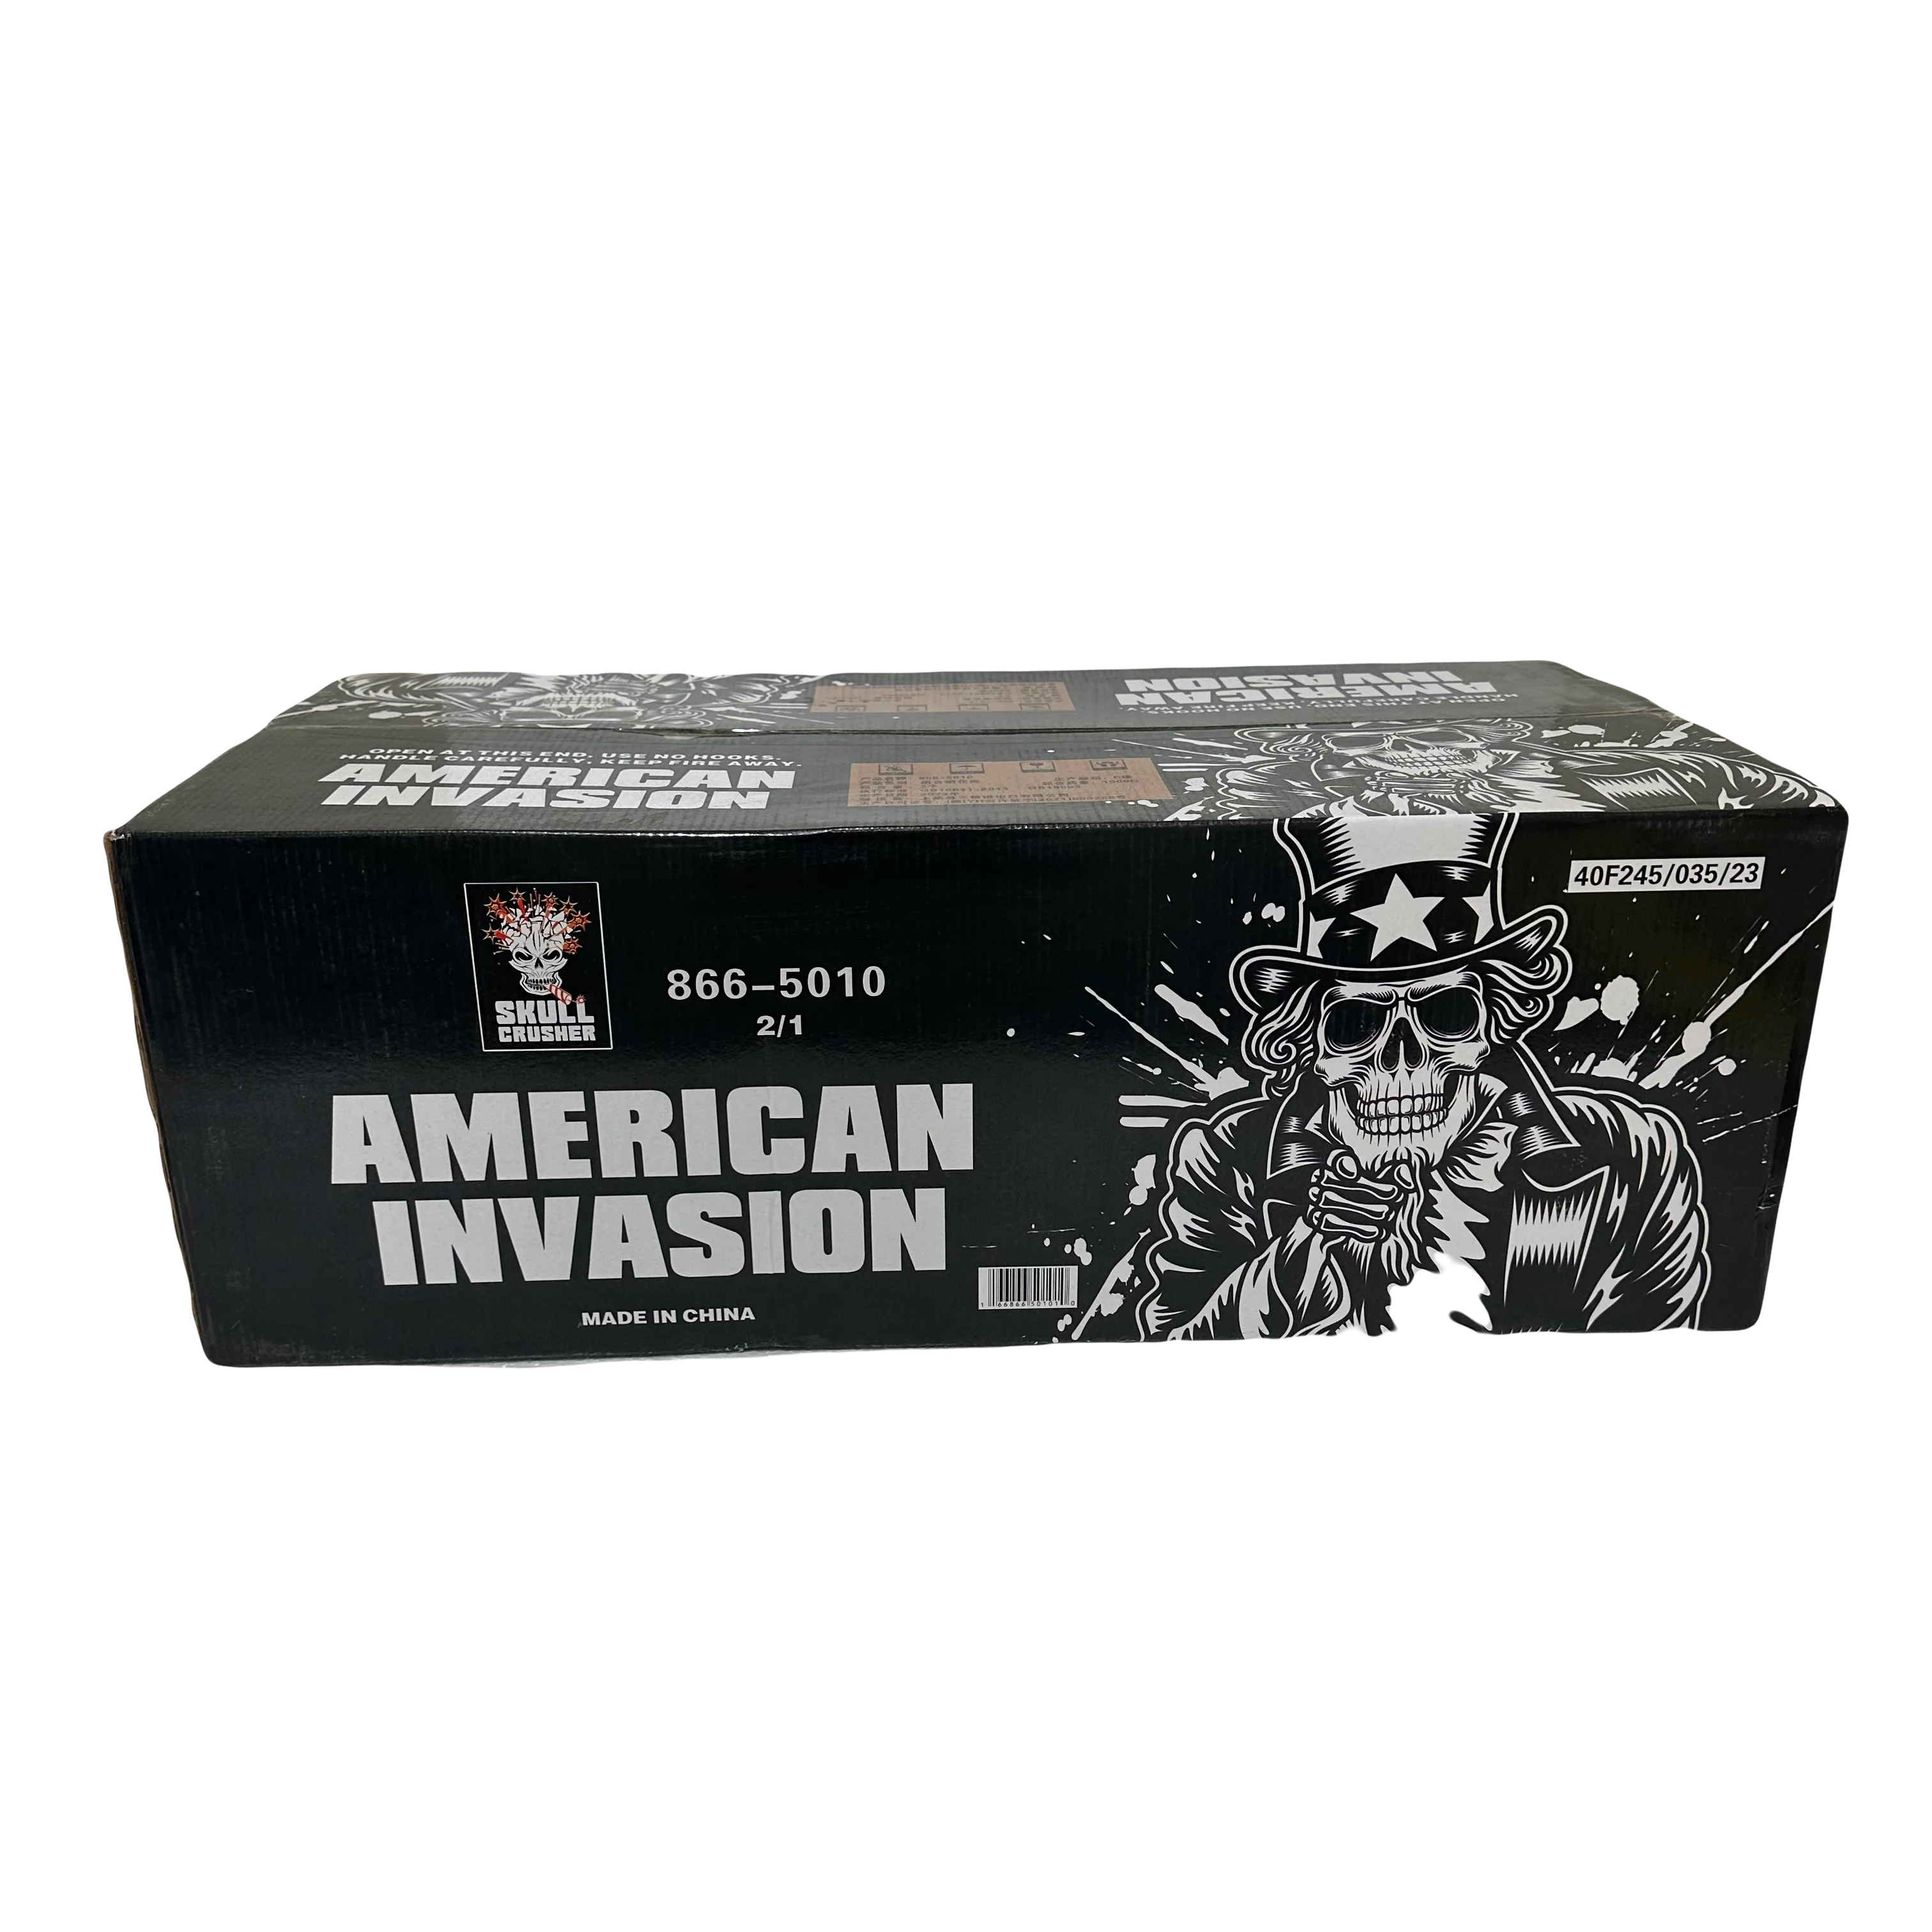 AMERICAN INVASION BY 866(2/1) (Case - 2 Units)